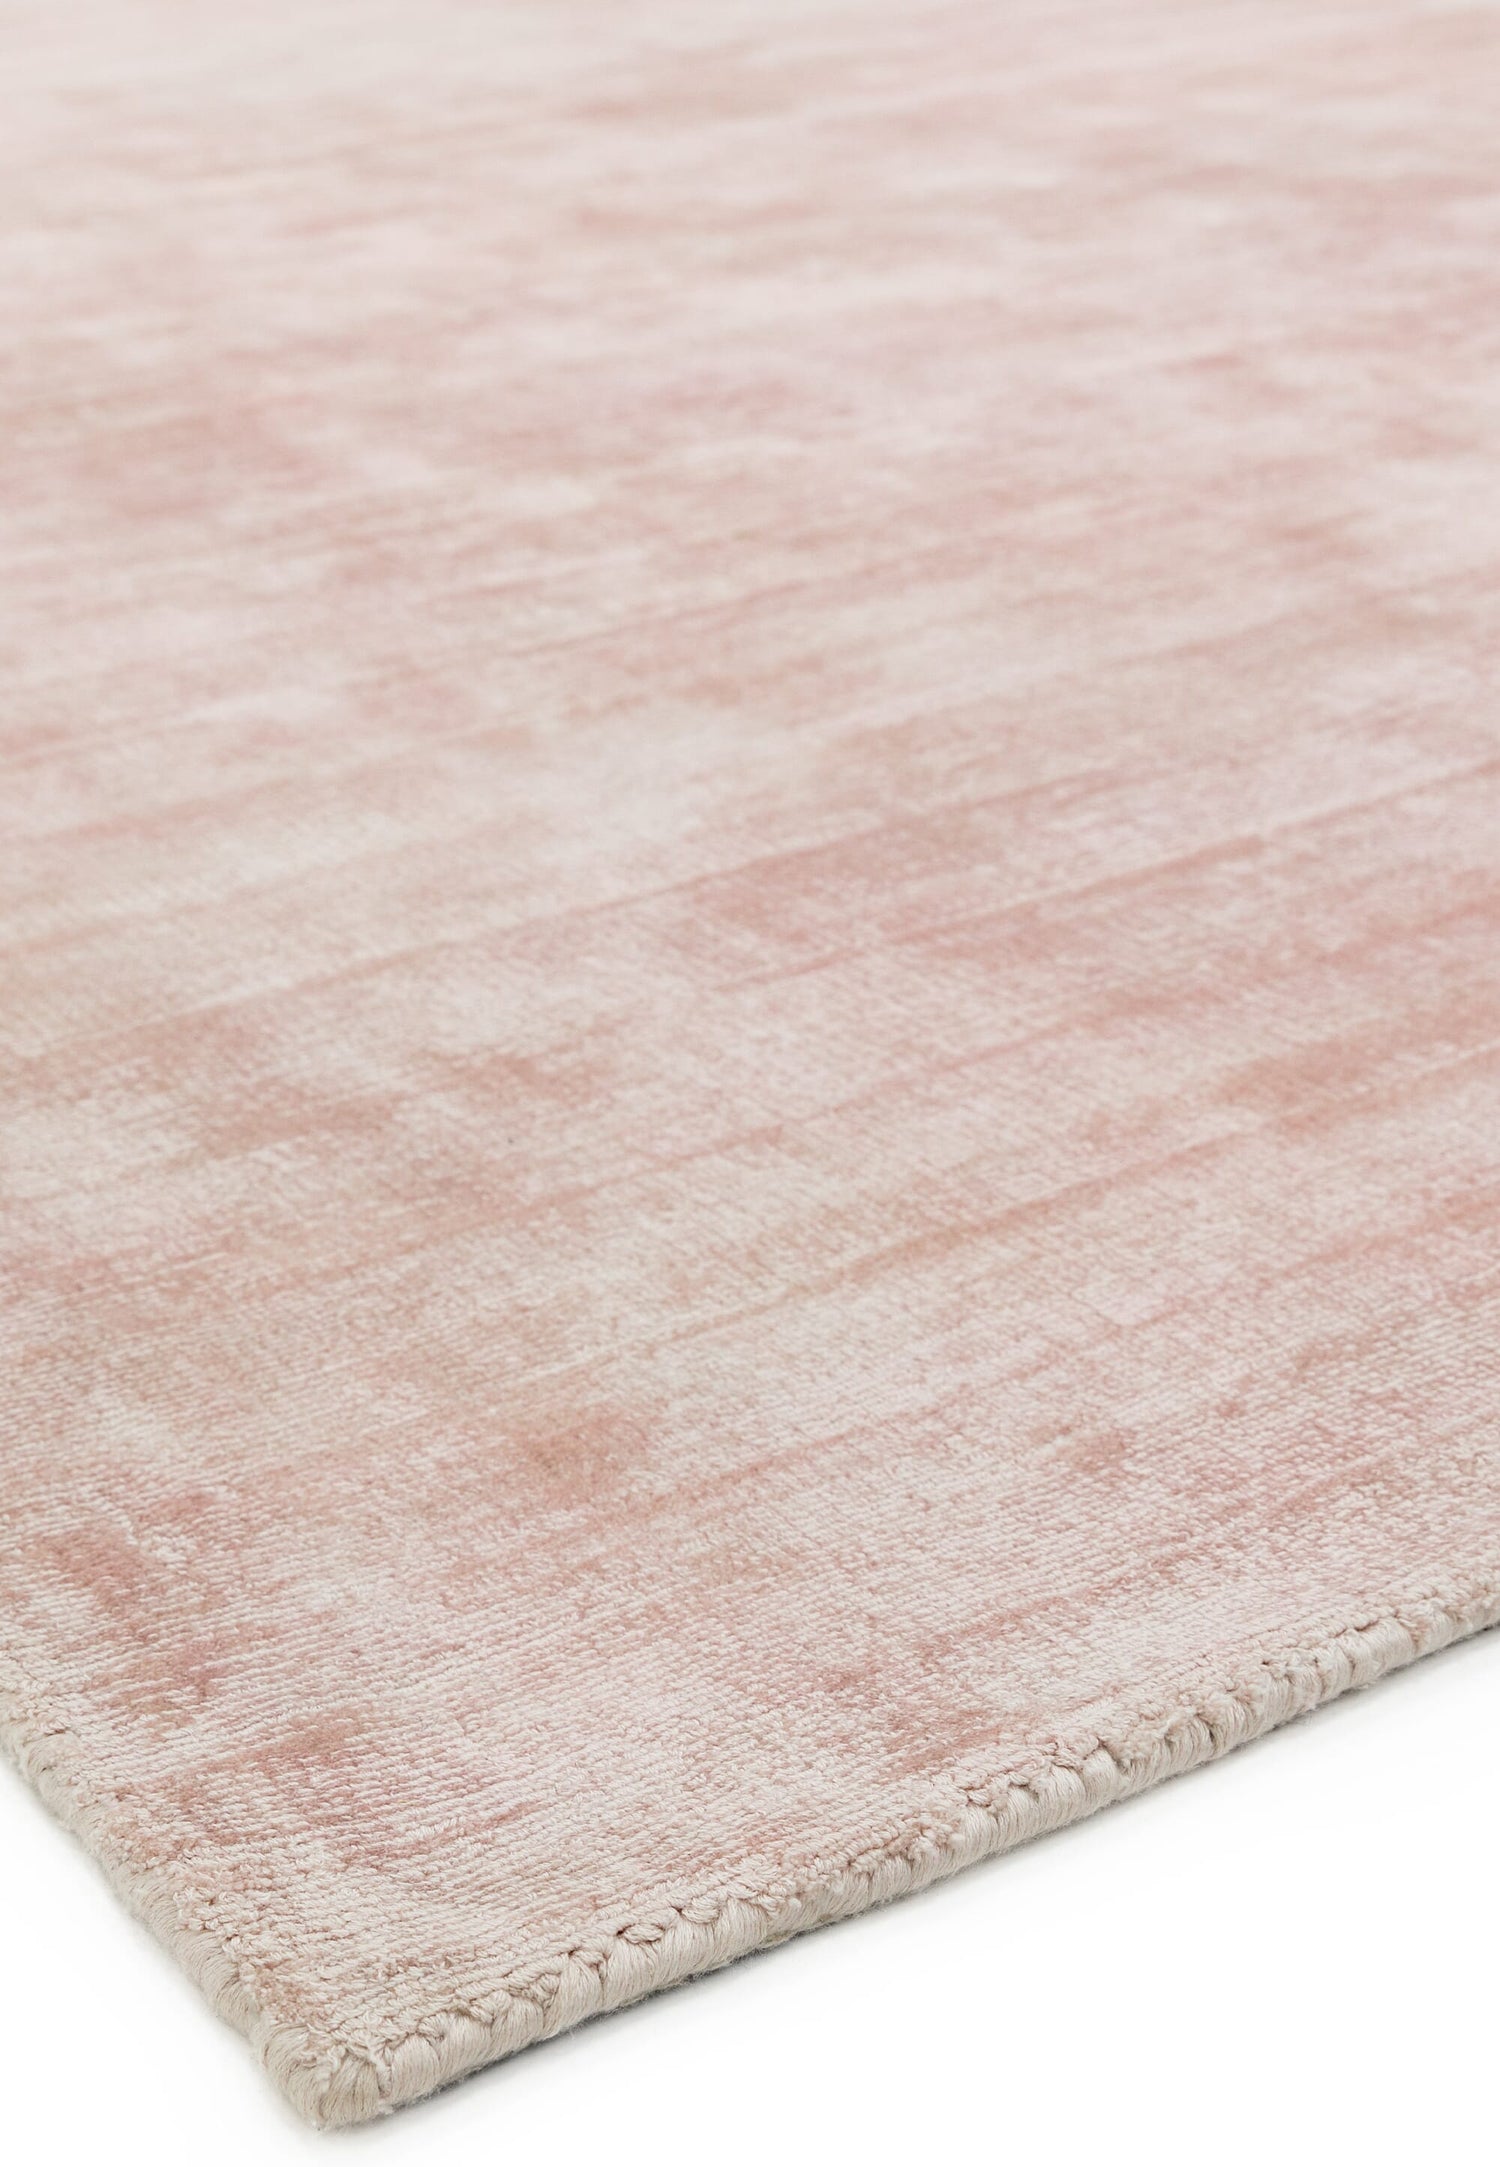  Asiatic Carpets-Asiatic Carpets Blade Hand Woven Rug Pink - 160 x 230cm-Pink 749 